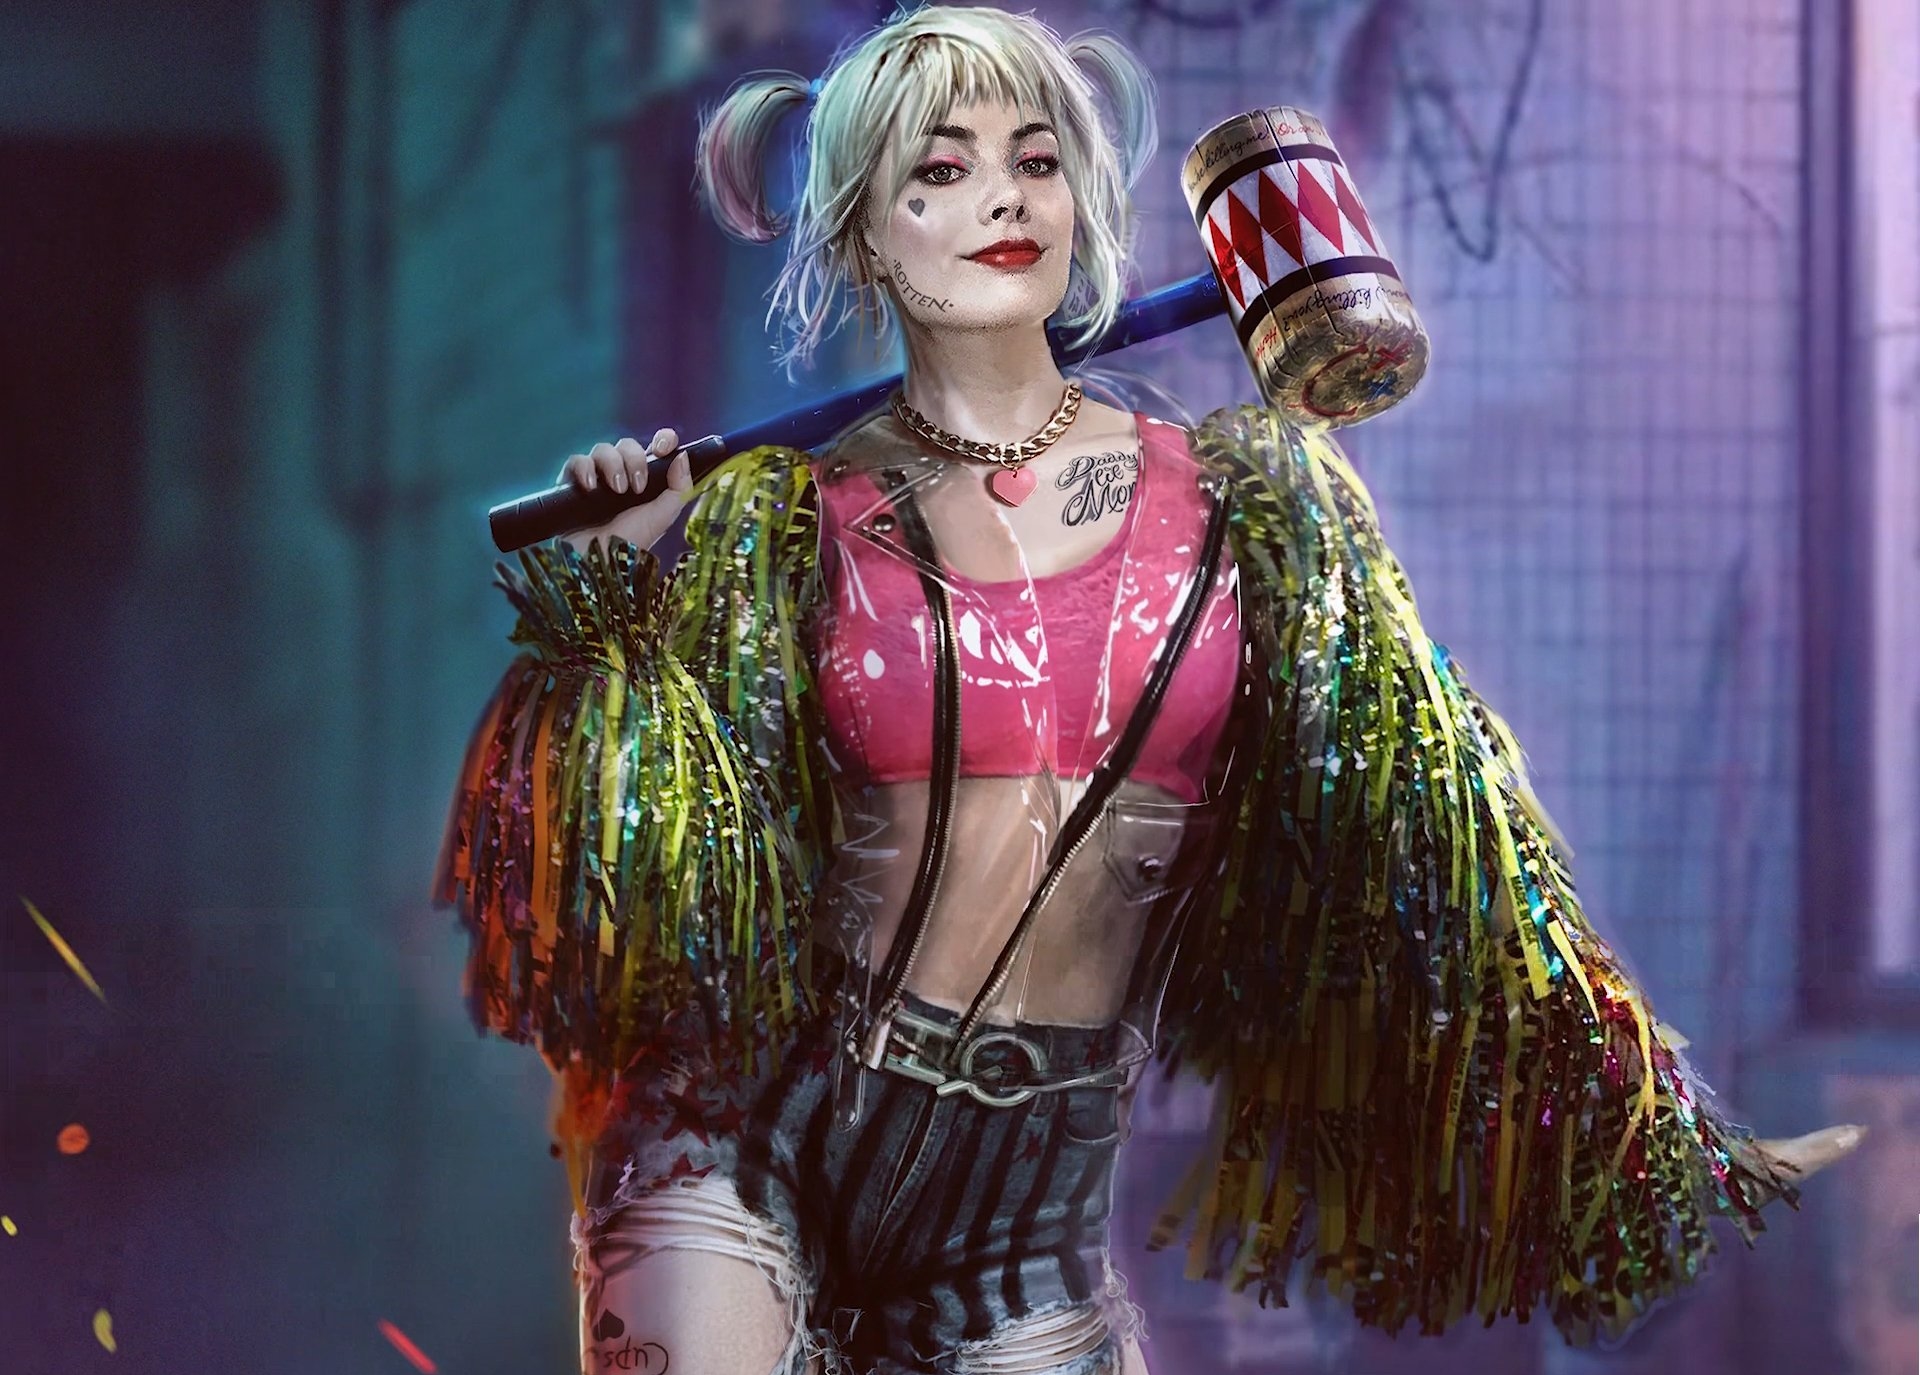 birds of prey (and the fantabulous emancipation of one harley quinn), movie, dc comics, harley quinn